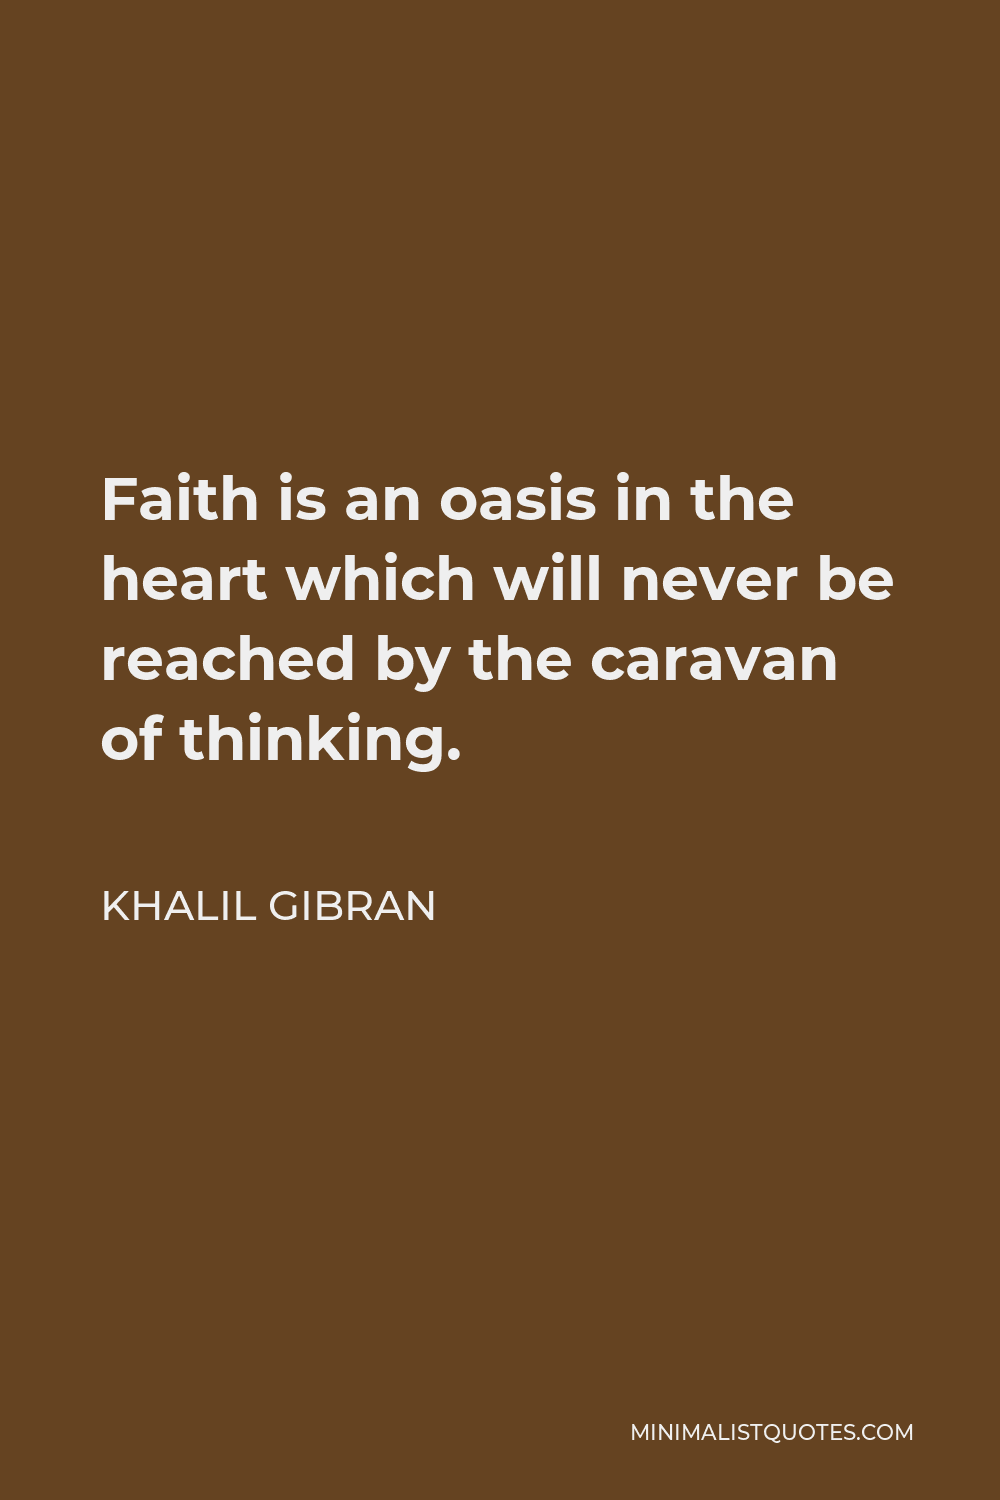 Khalil Gibran Quote - Faith is an oasis in the heart which will never be reached by the caravan of thinking.